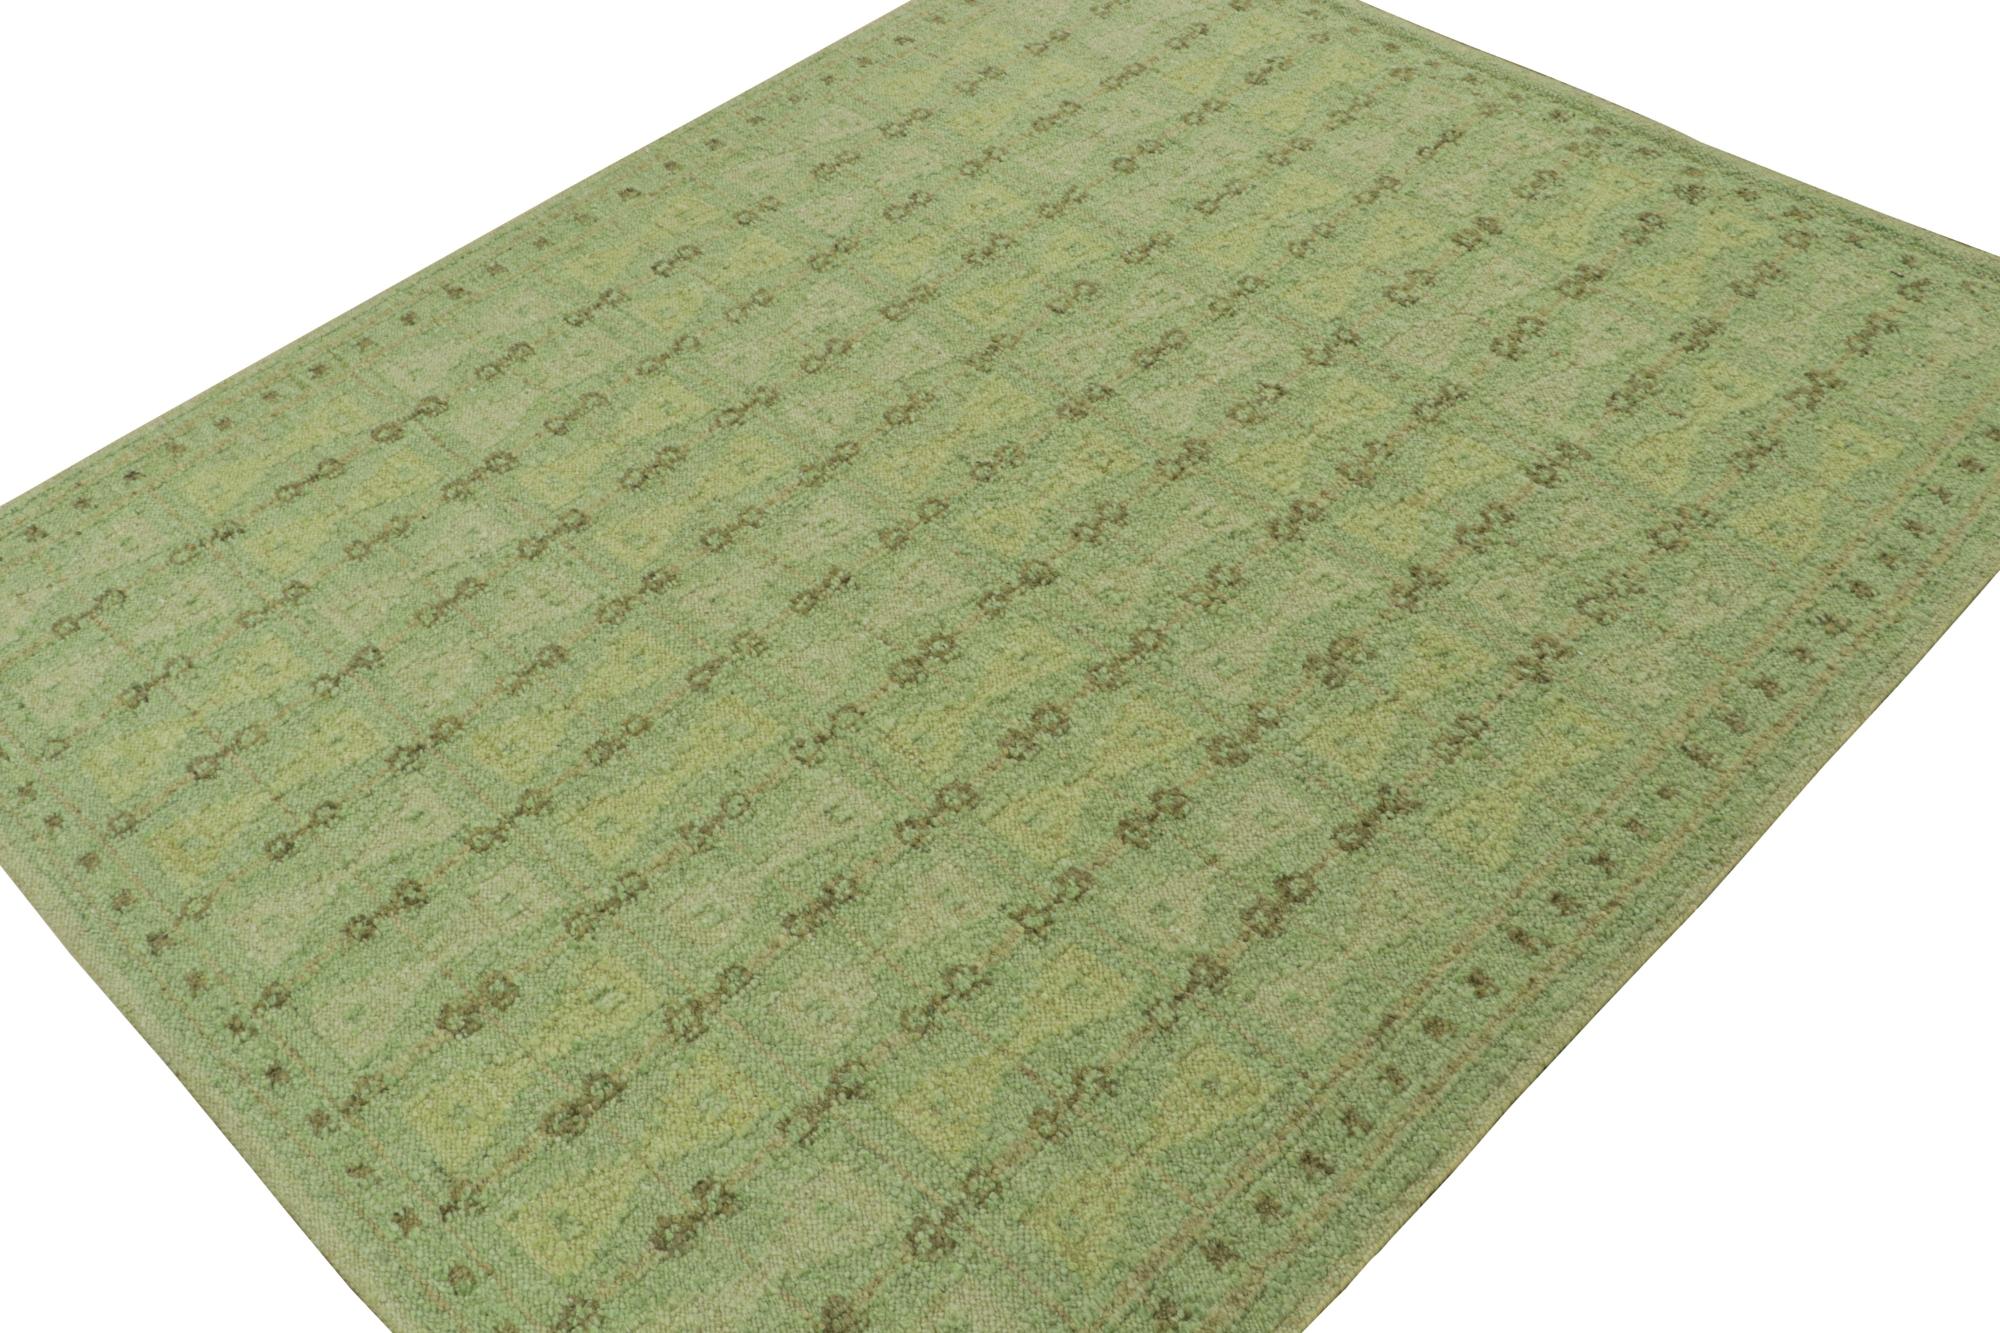 Indian Rug & Kilim’s Scandinavian Style Kilim with Geometric Patterns in Tones of Green For Sale